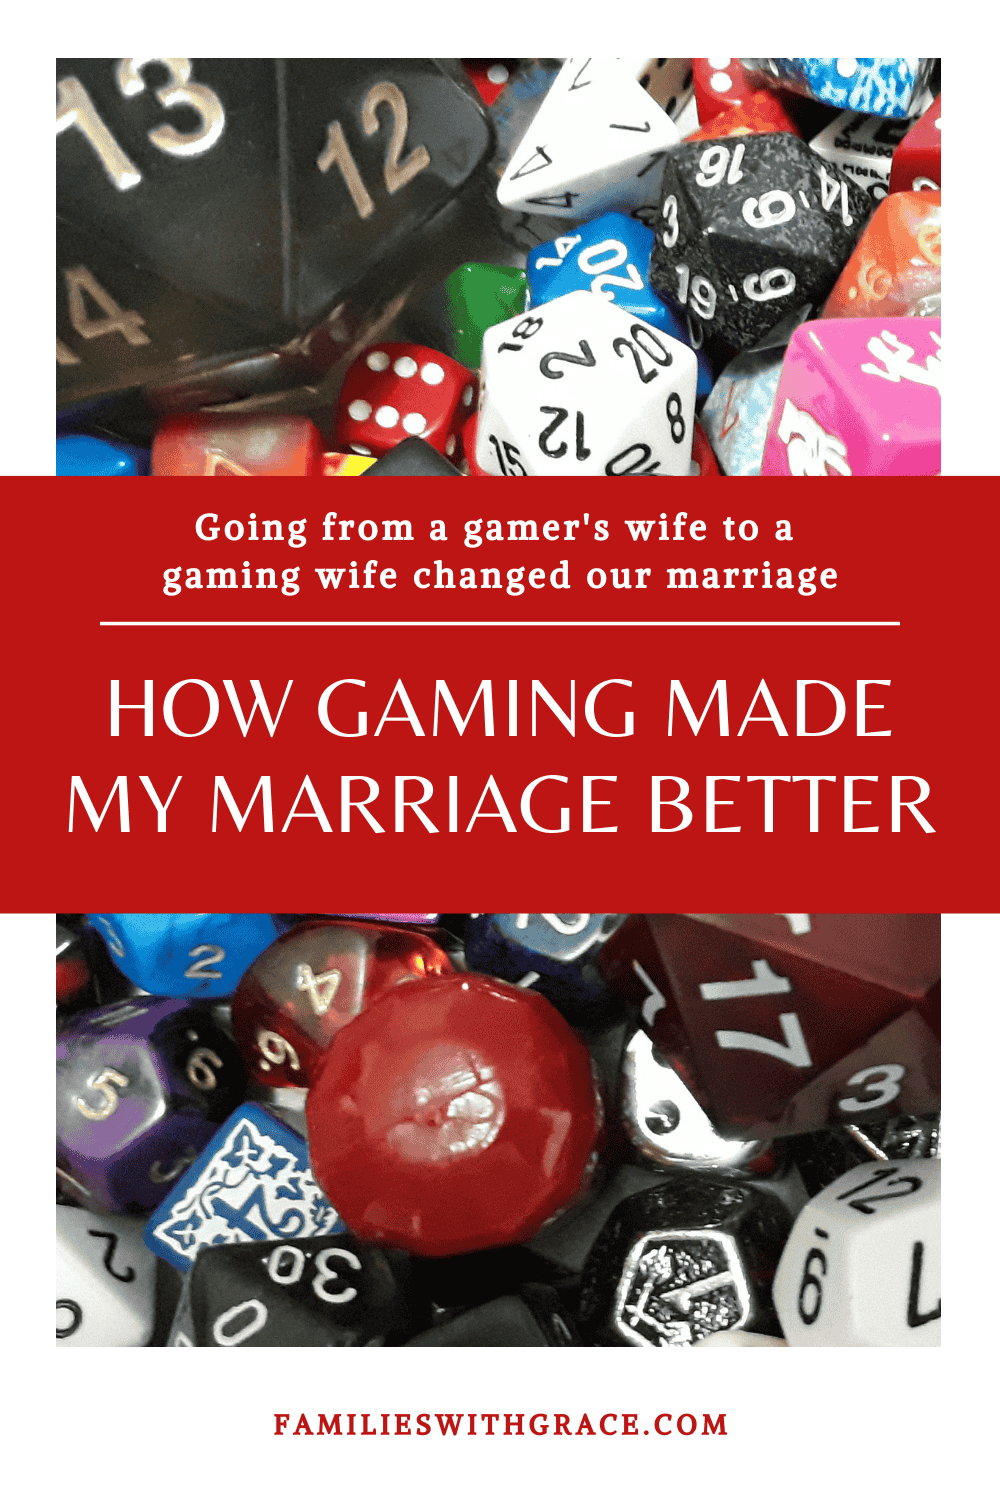 How gaming made my marriage better